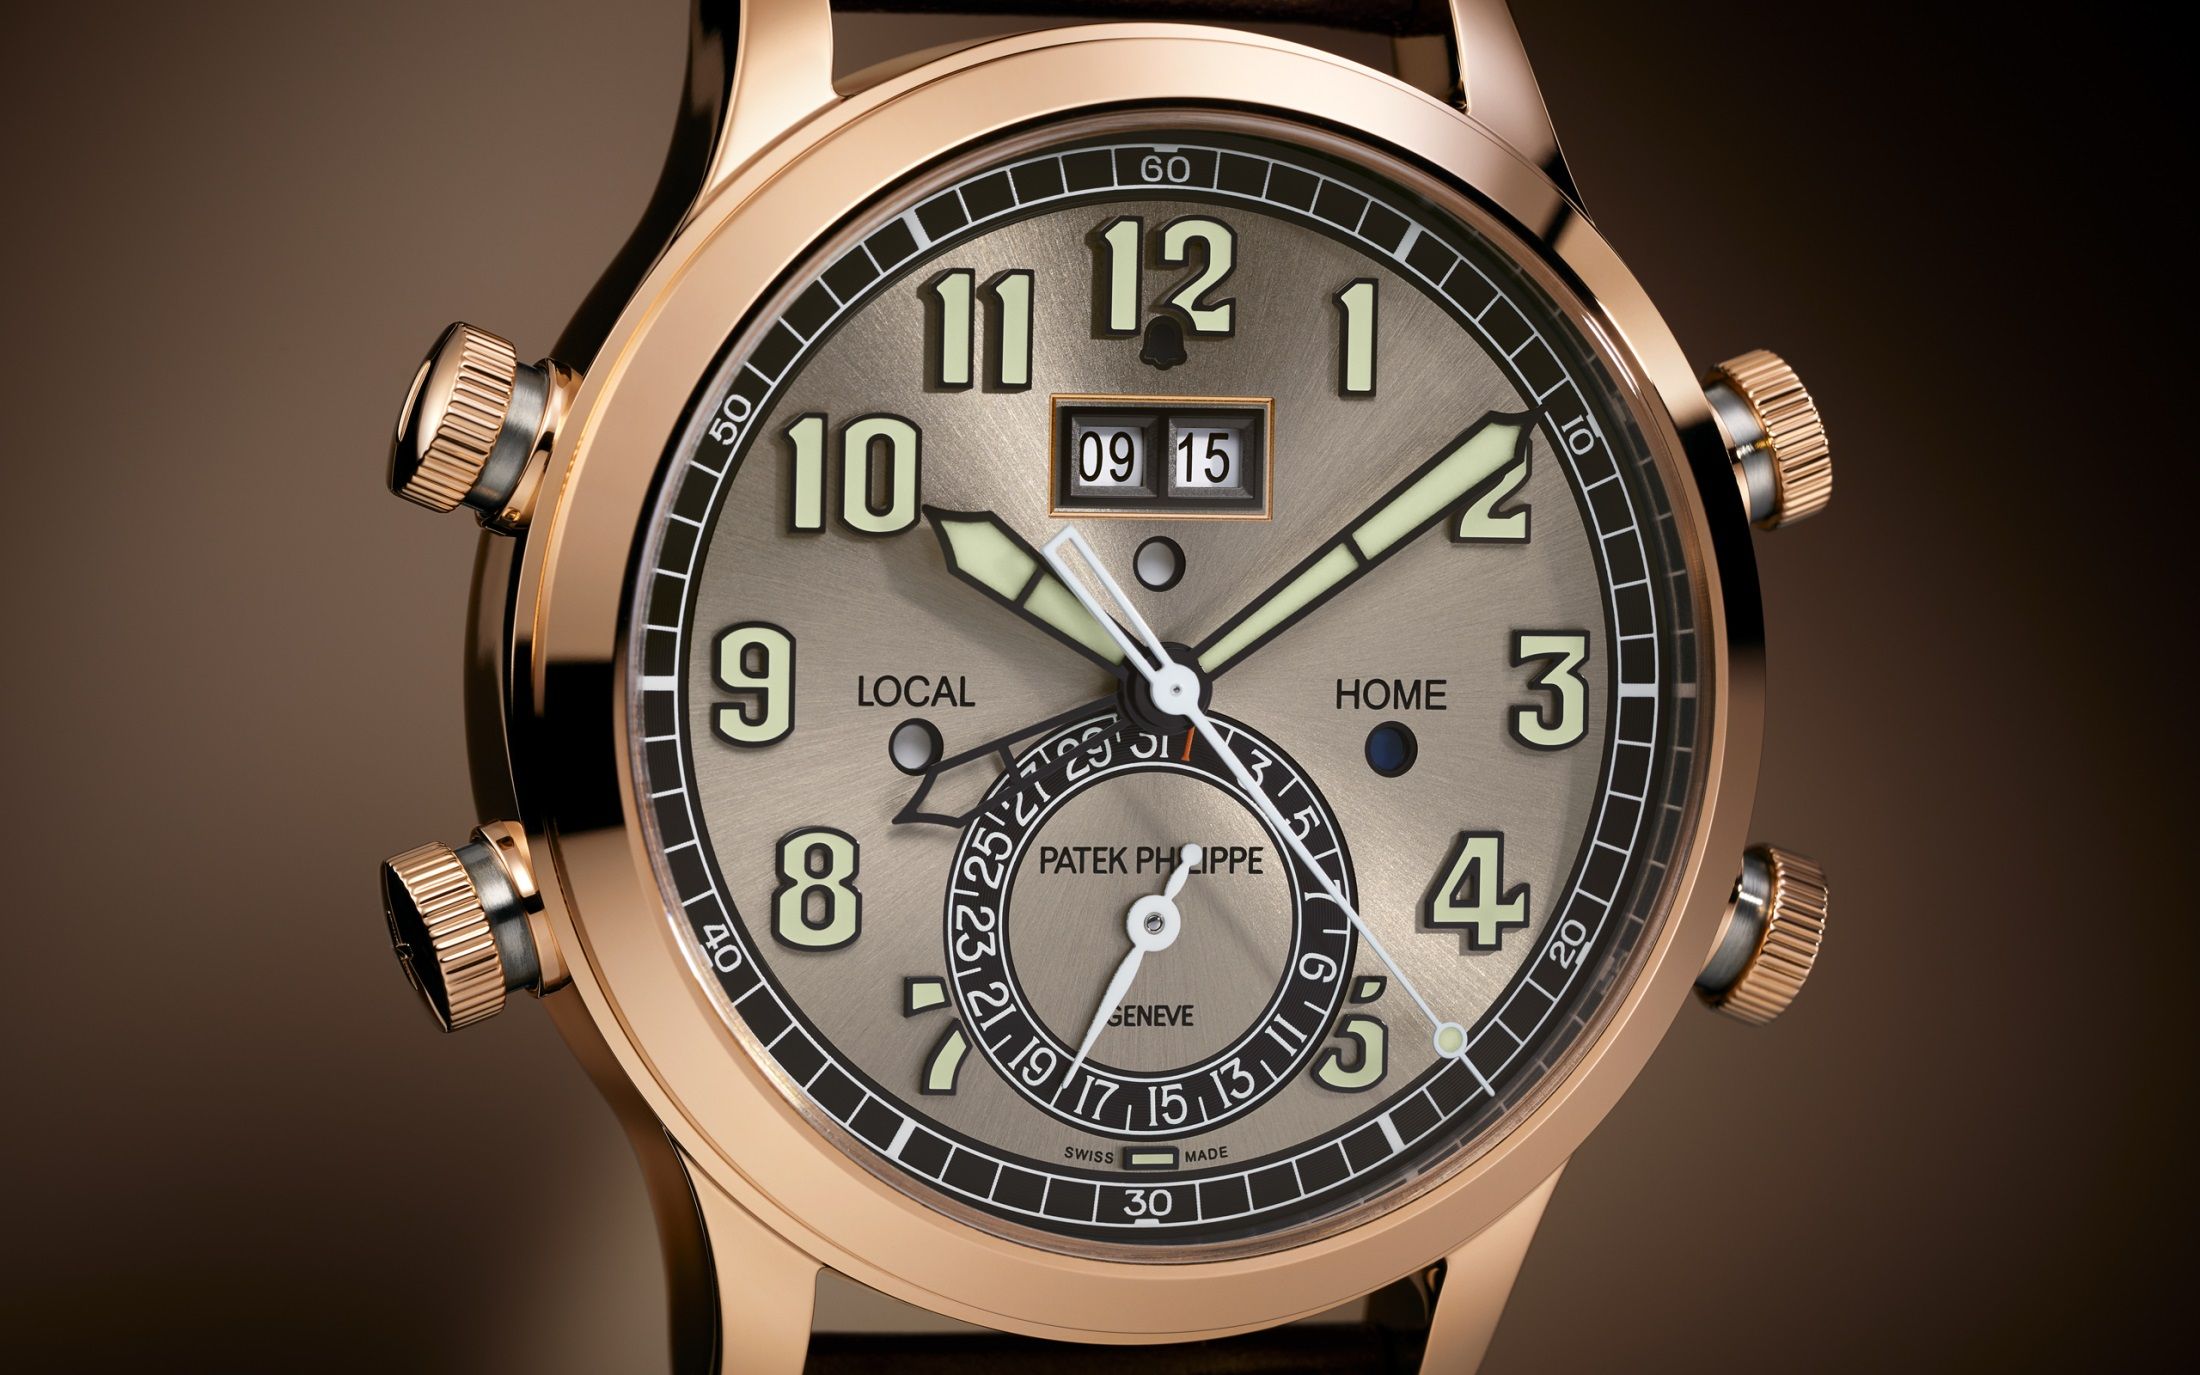 The Patek Philippe Alarm Travel Time Reference 5520RG